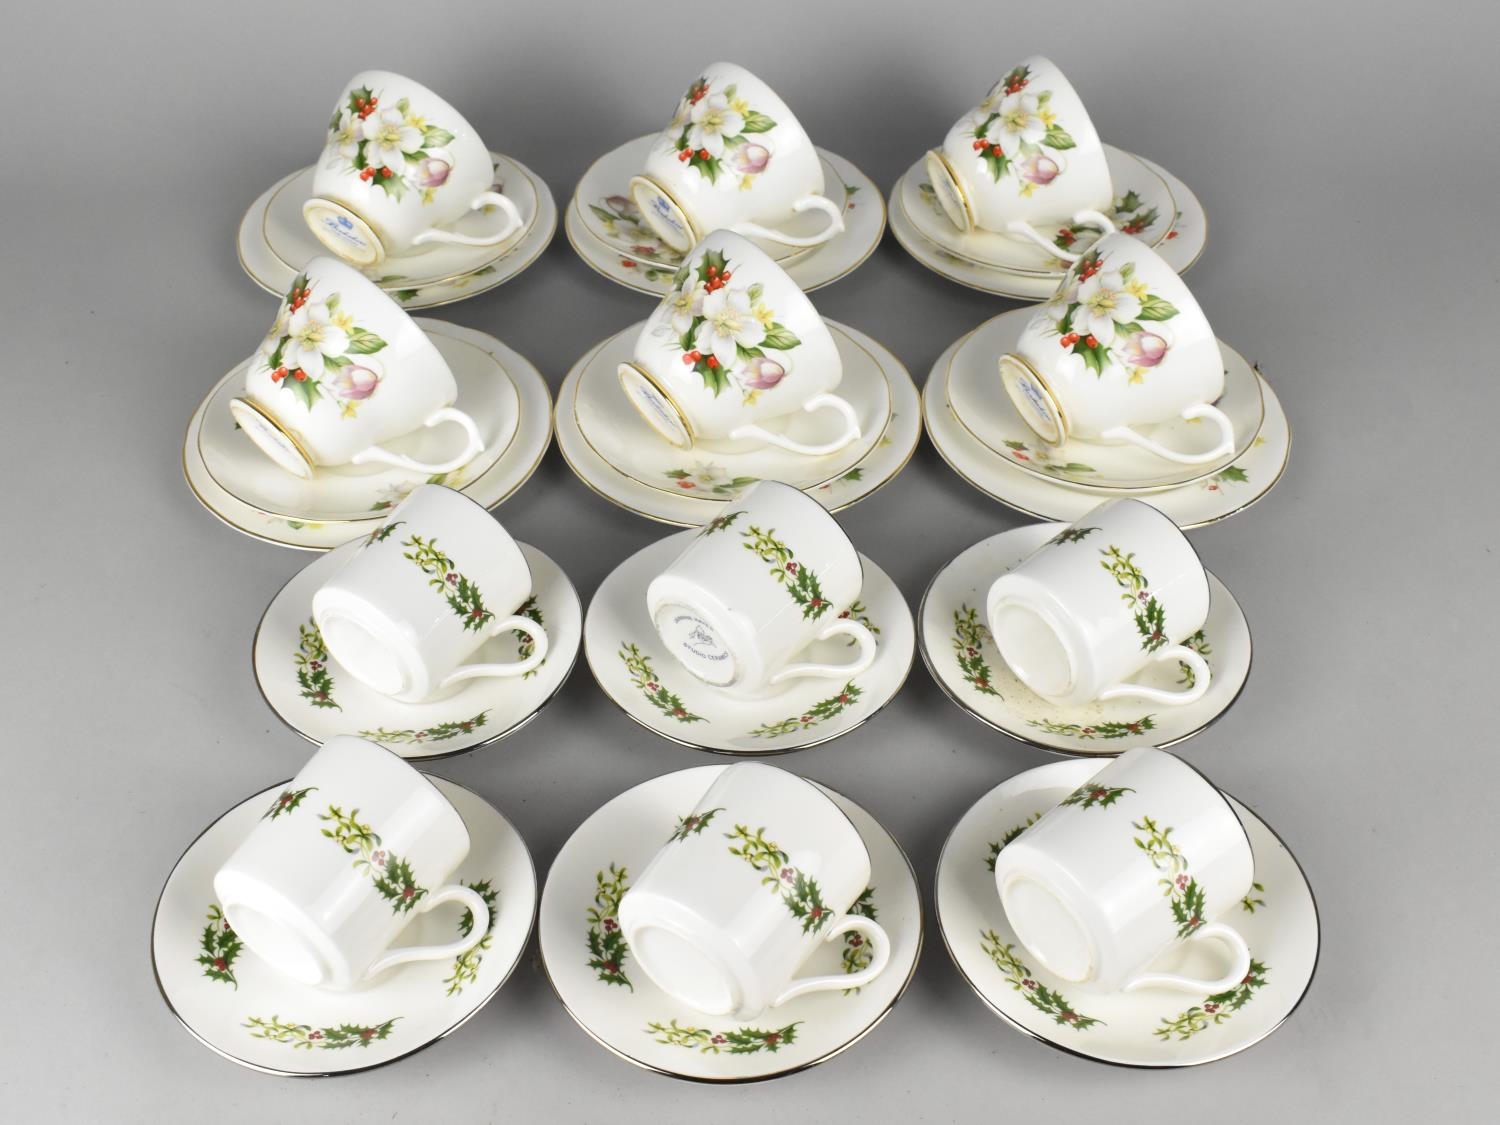 A Jannie Hayes Studio Ceramic Holly and Mistletoe Decorated Coffee Set for Six Together with a